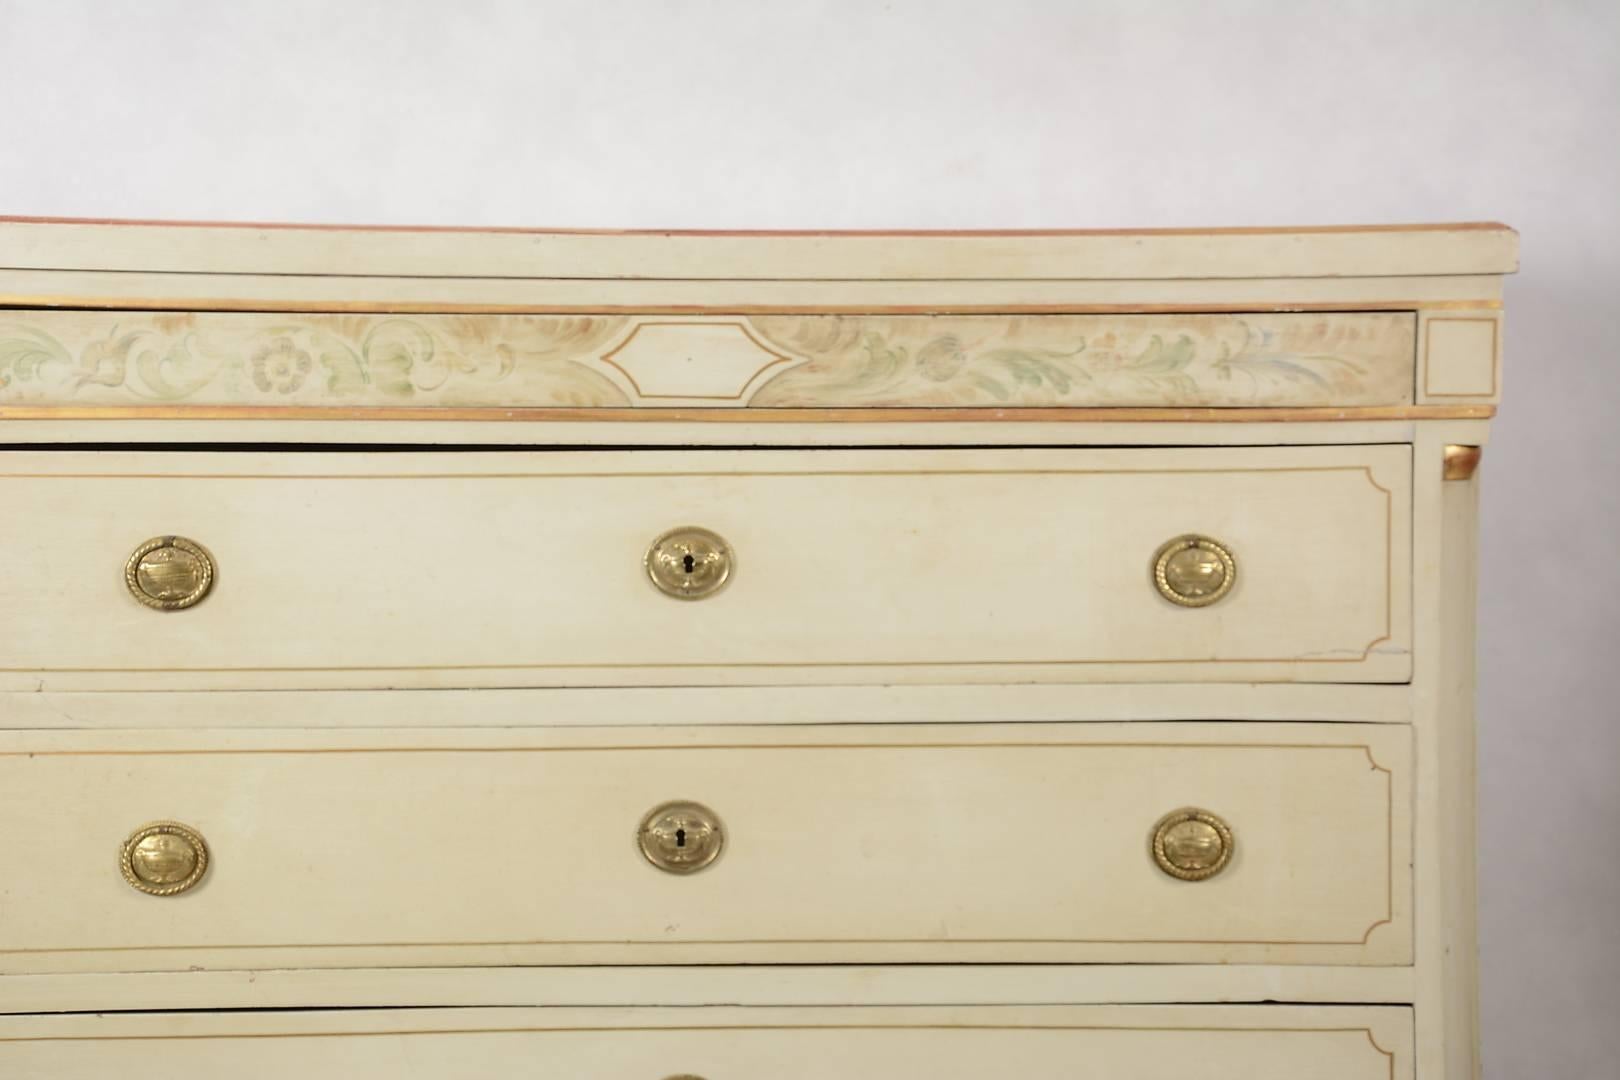 19th century antique Swedish Gustavian painted chest of drawers commode with detailed hand painted designs on the top rail and gilt detailing.

It has four drawers with brass ring pulls and a carved plinth and feet with column detail on the front